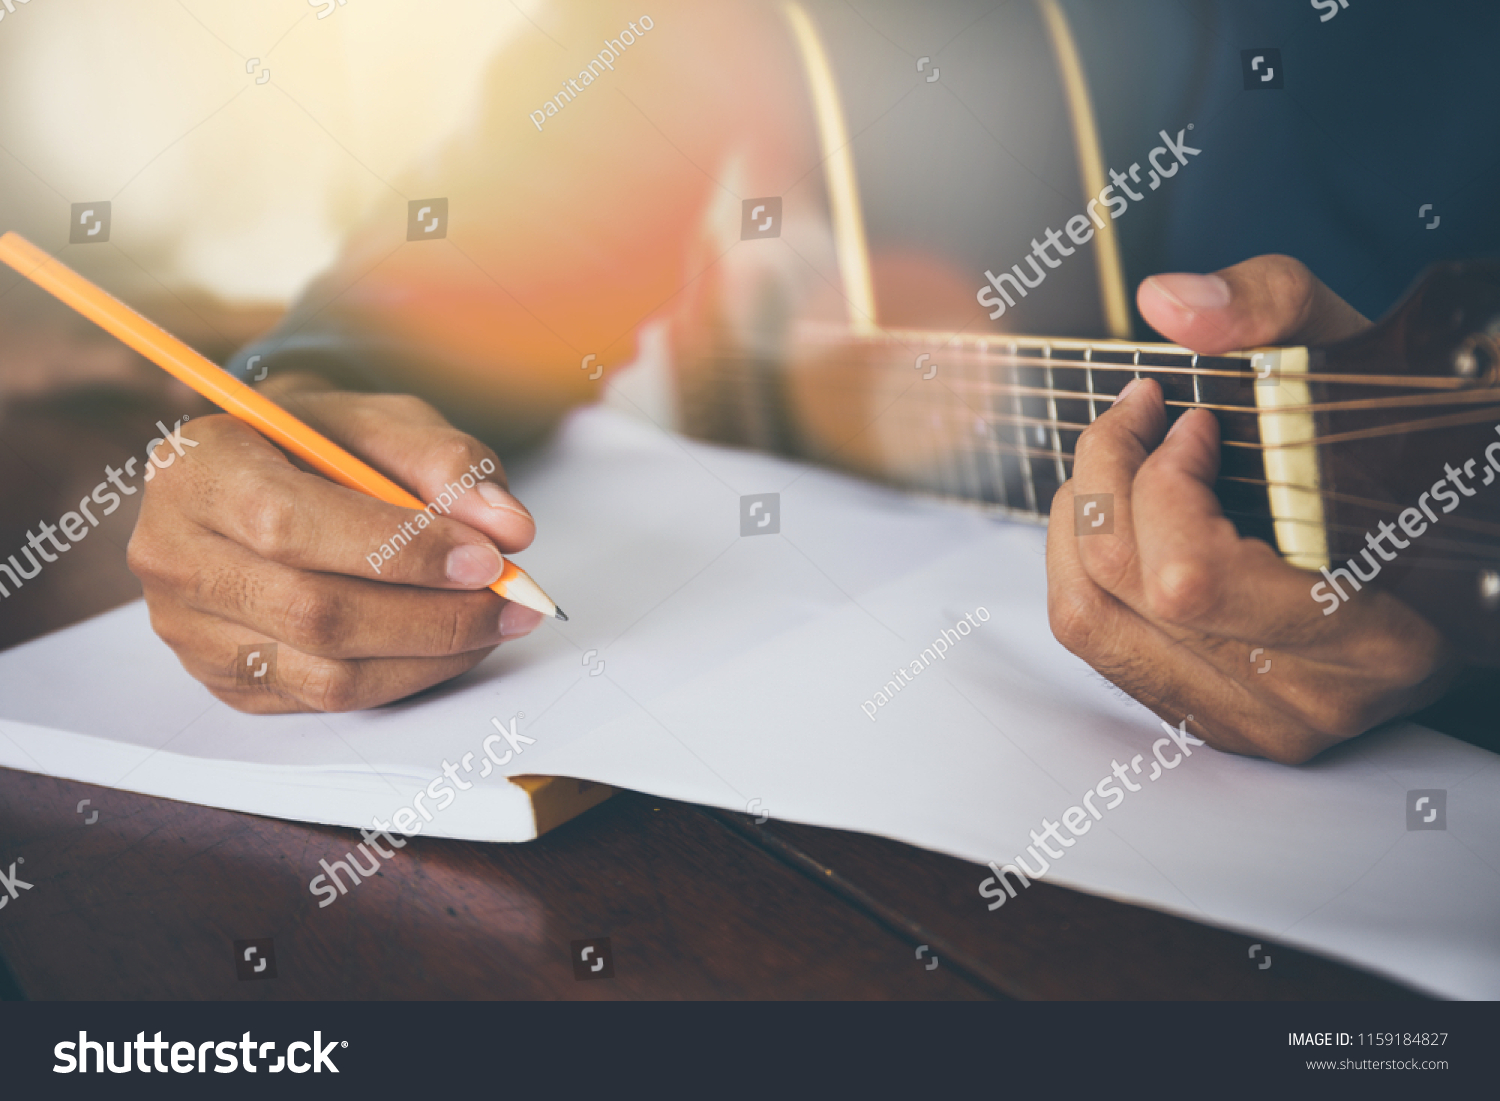 songwriter thinking and writing notes,lyrics in book at studio.man playing live acoustic guitar.concept for musician creative.artist composer in work process.people relaxing time with instrument #1159184827